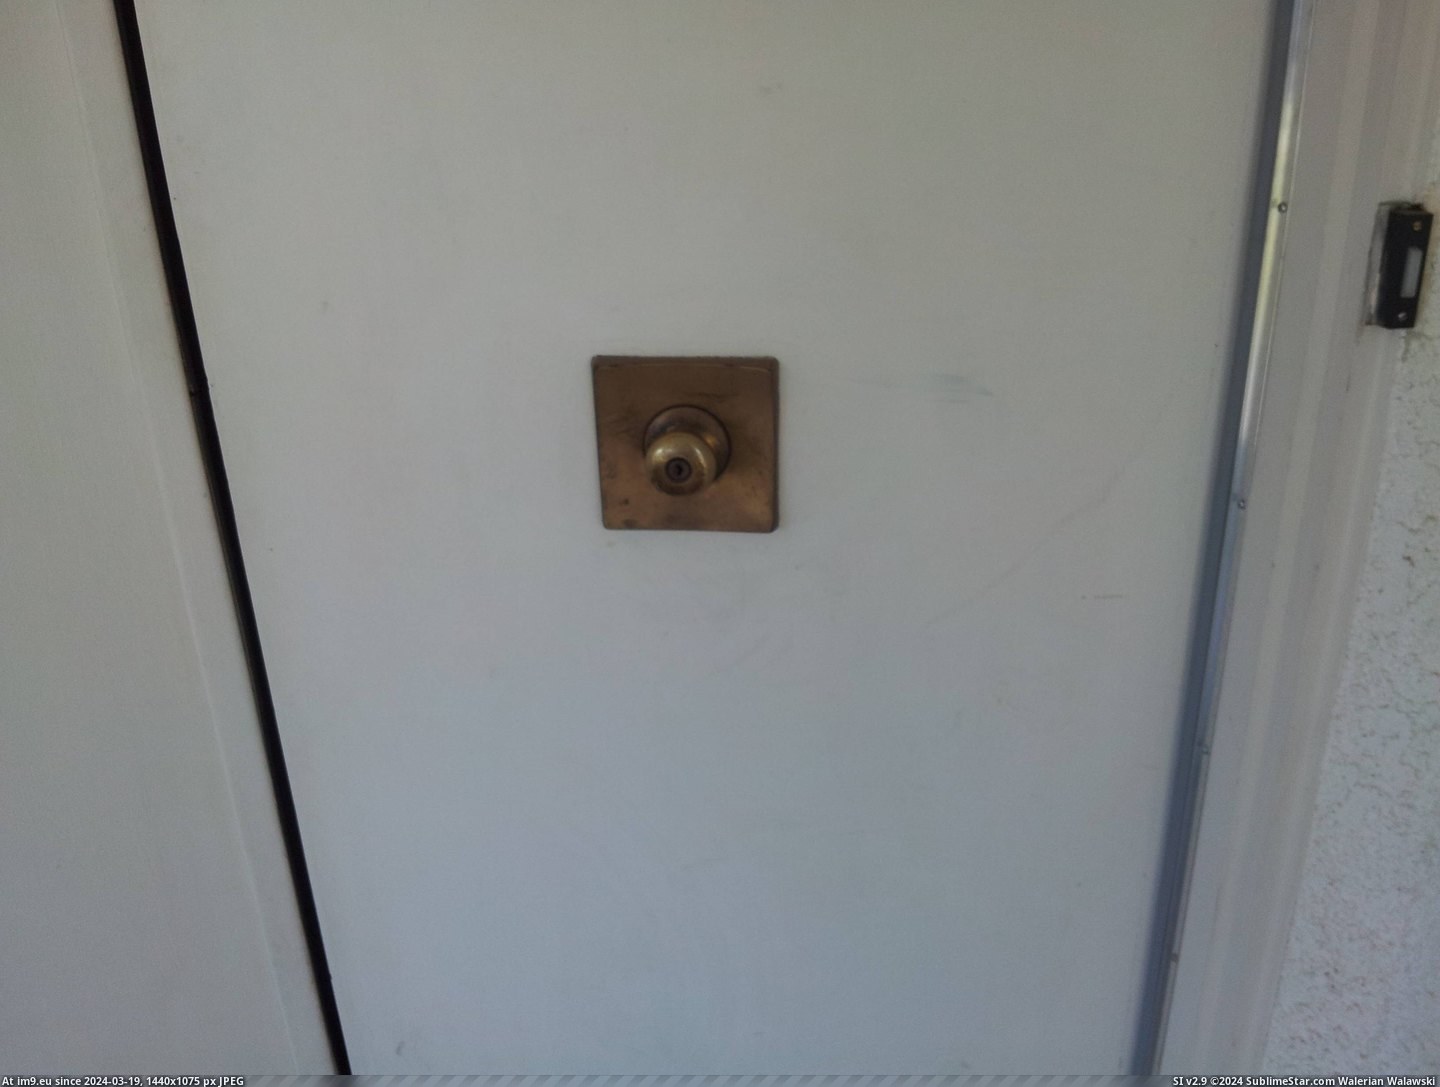 #Sister #House #Knobs #Door #Moved [Mildlyinteresting] My sister just moved into a house with door knobs in the middle of the door. 2 Pic. (Image of album My r/MILDLYINTERESTING favs))